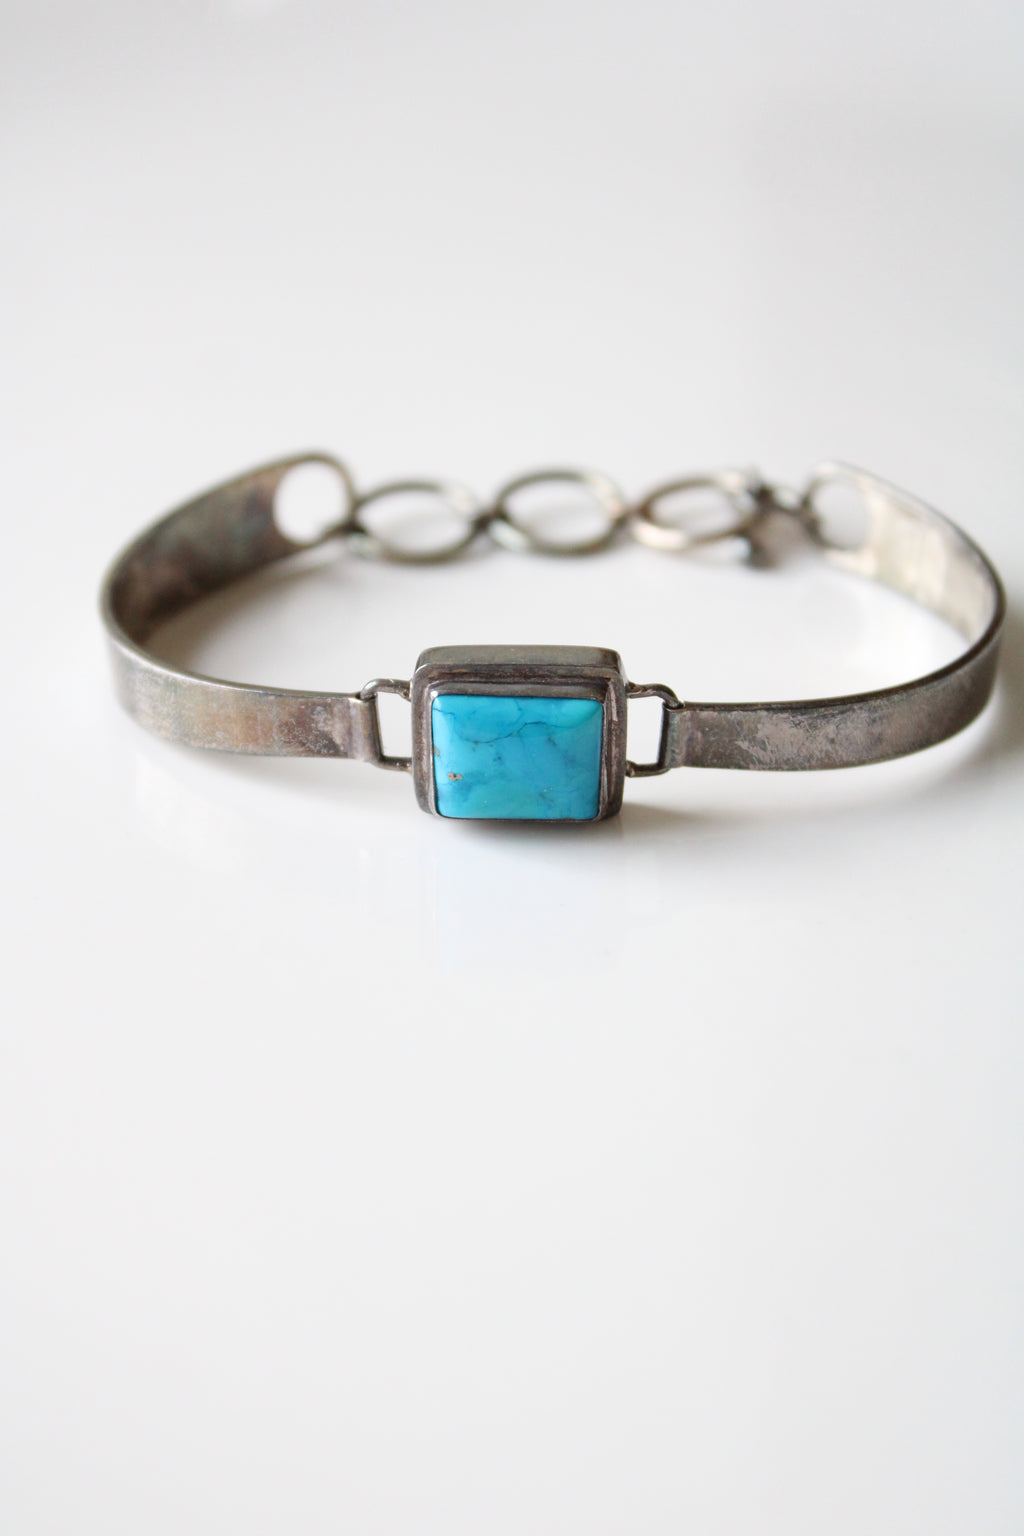 Turquoise Sterling Silver Toggle Bracelet